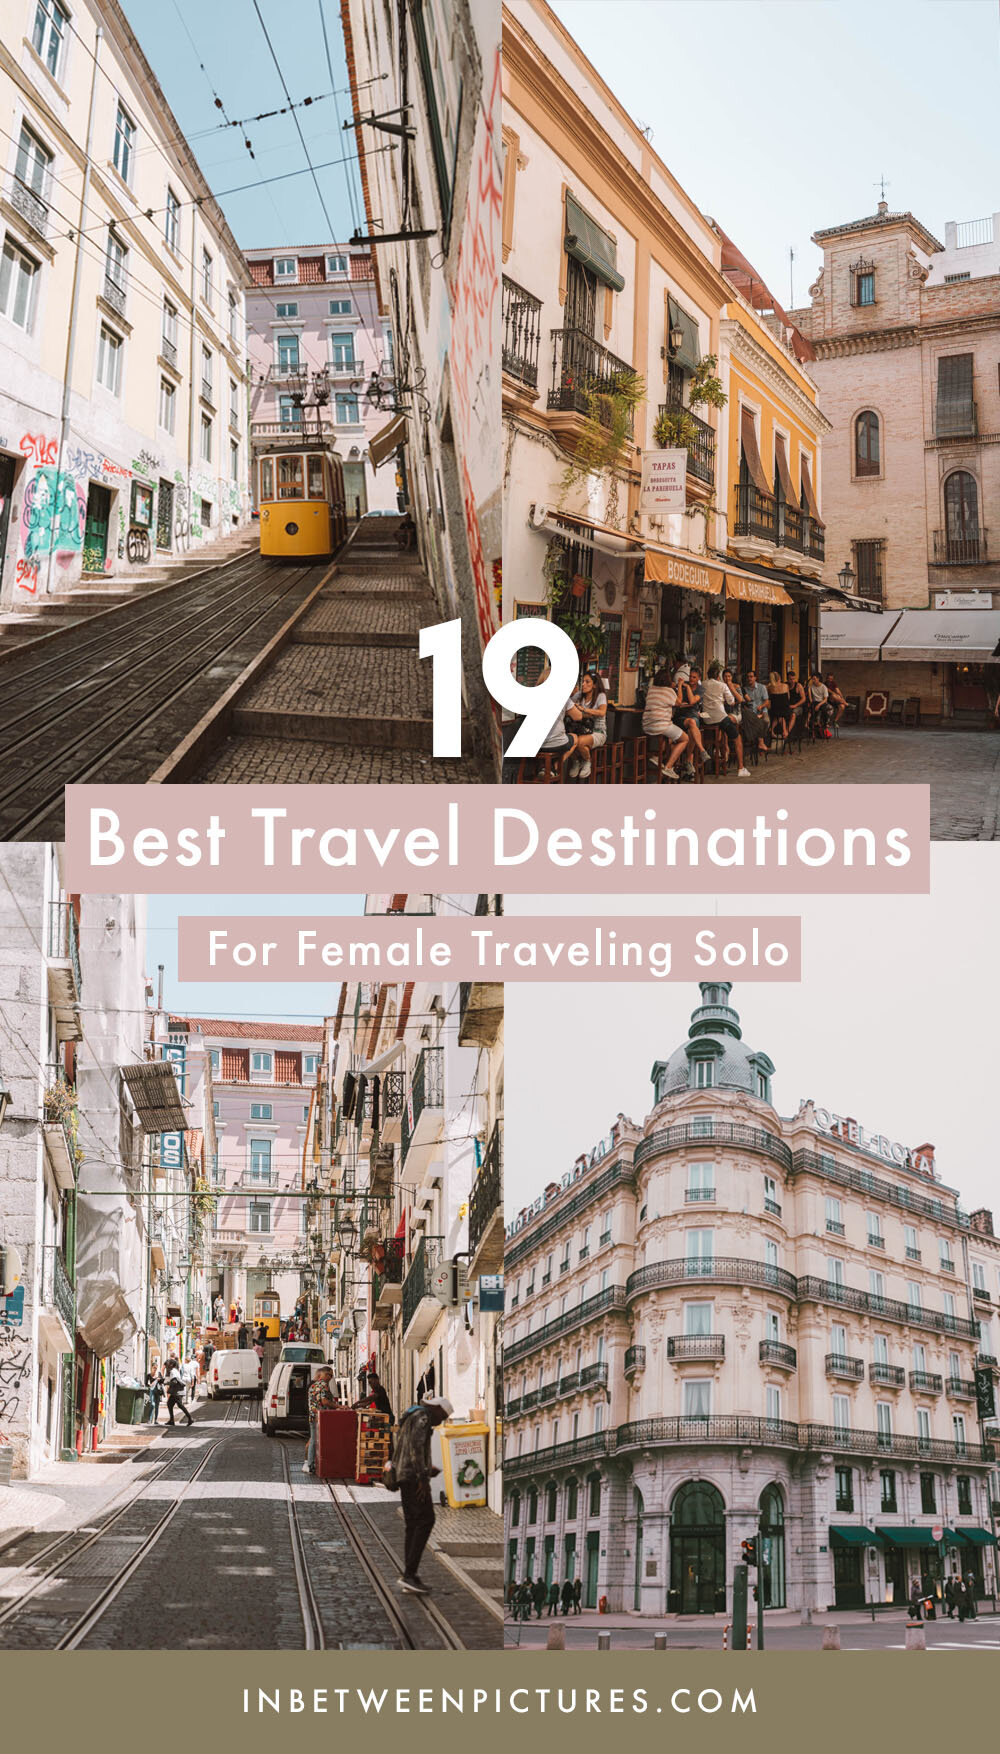 Where to travel alone for the first time as a female? Best First Time Solo Travel Destinations For Female to help you jump-start your solo adventures. #SoloTraveler